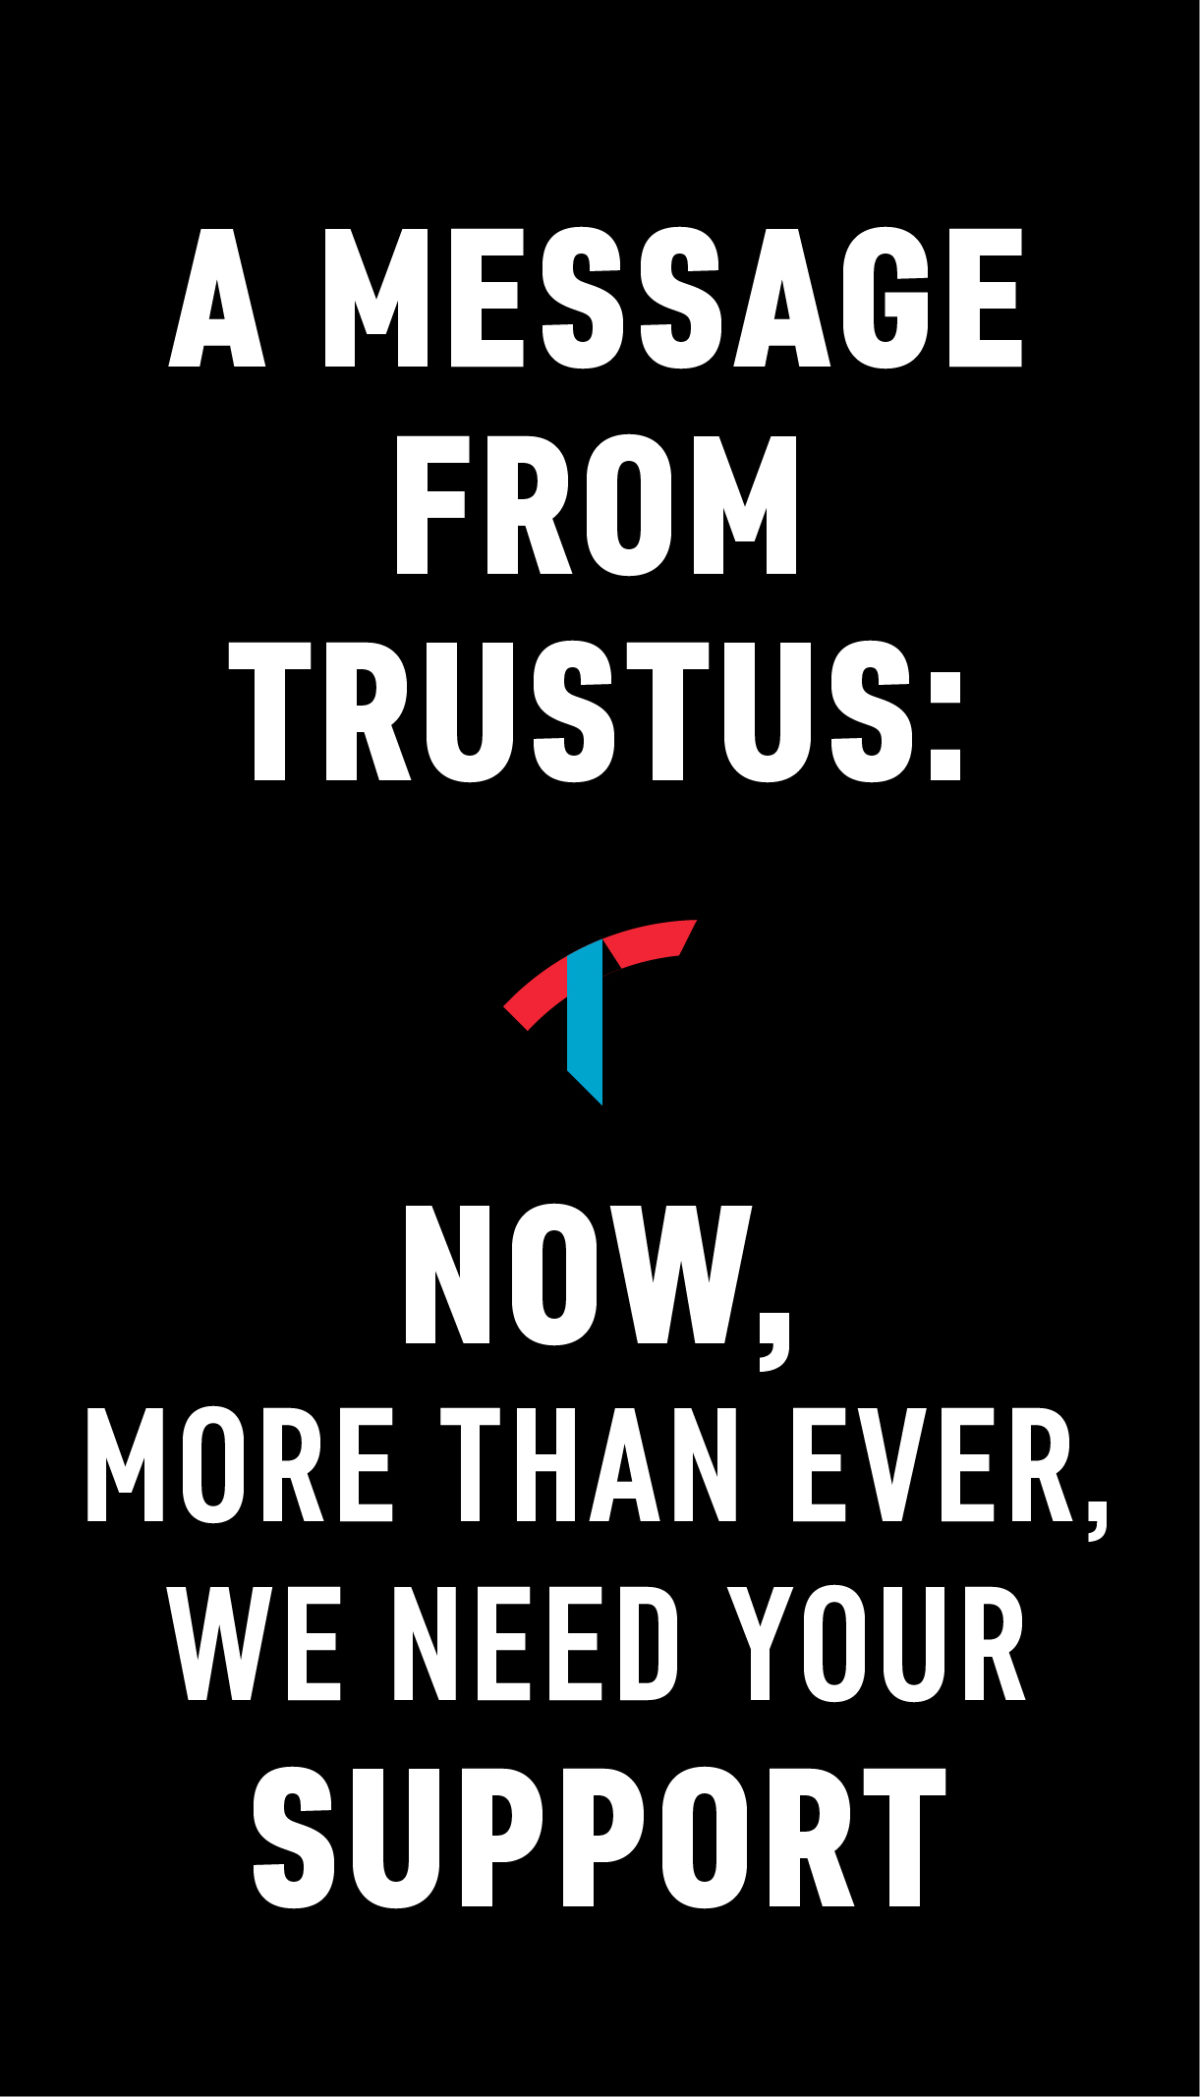 A Message from Trustus